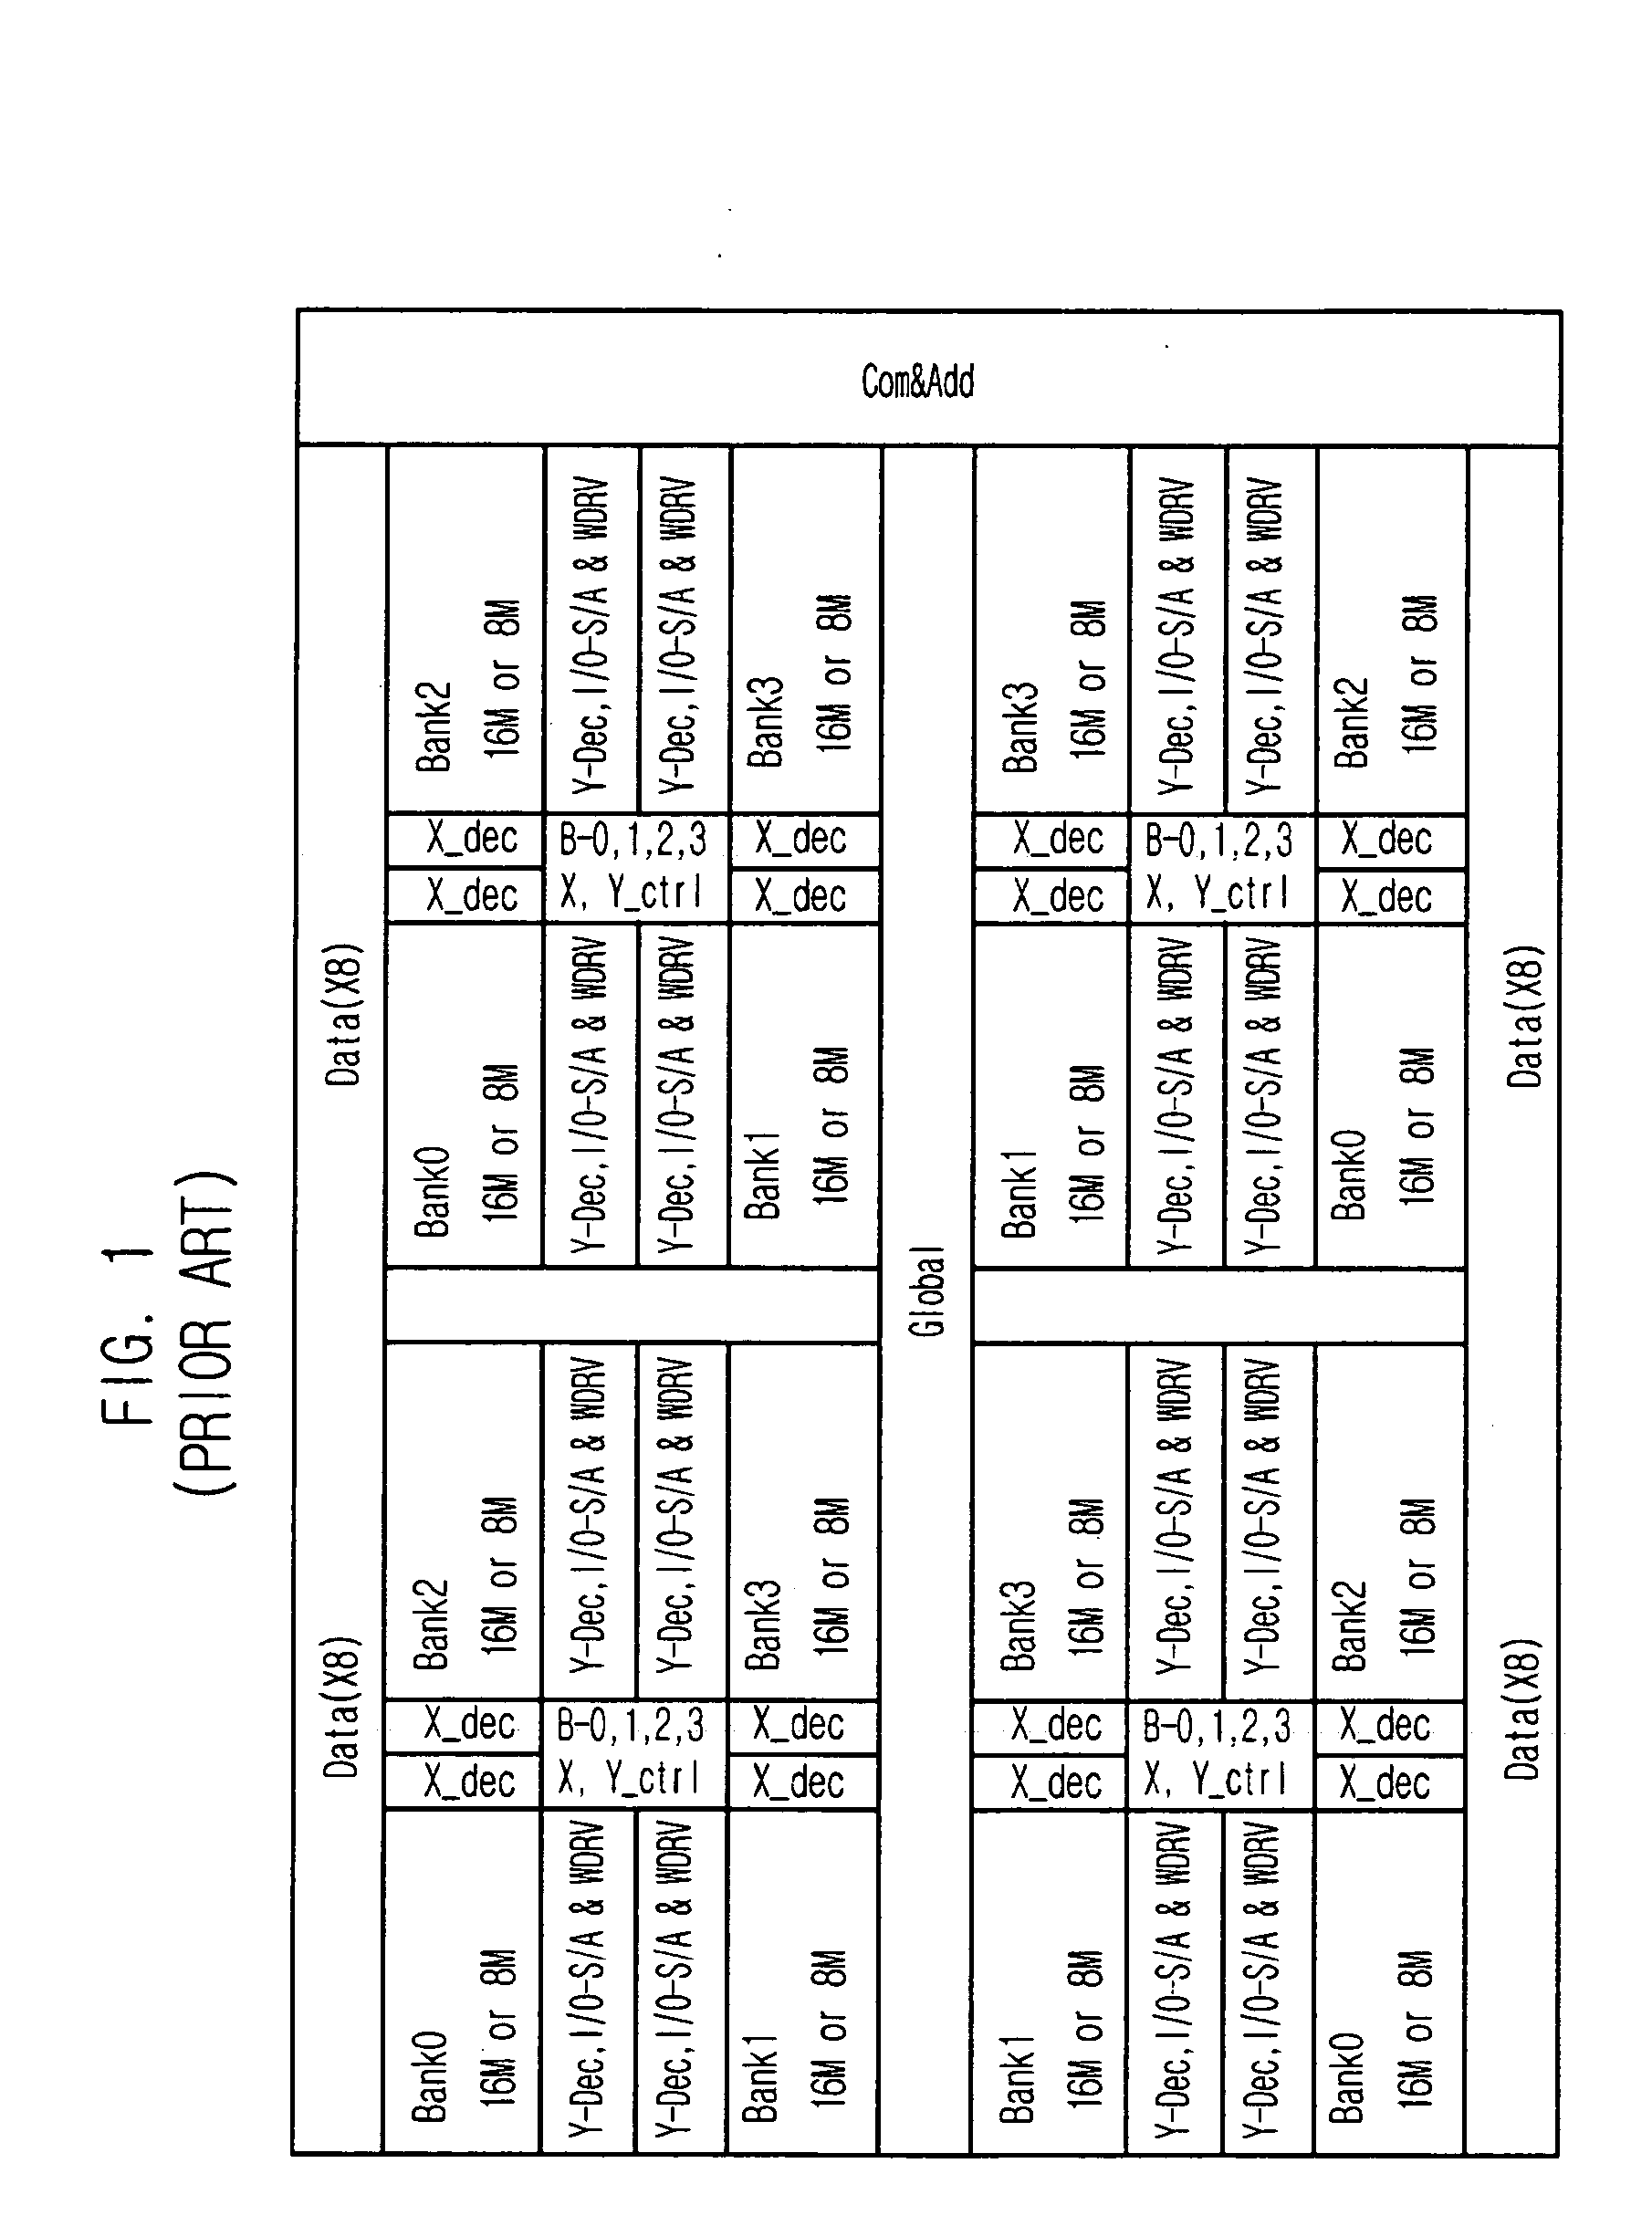 Memory chip architecture with high speed operation